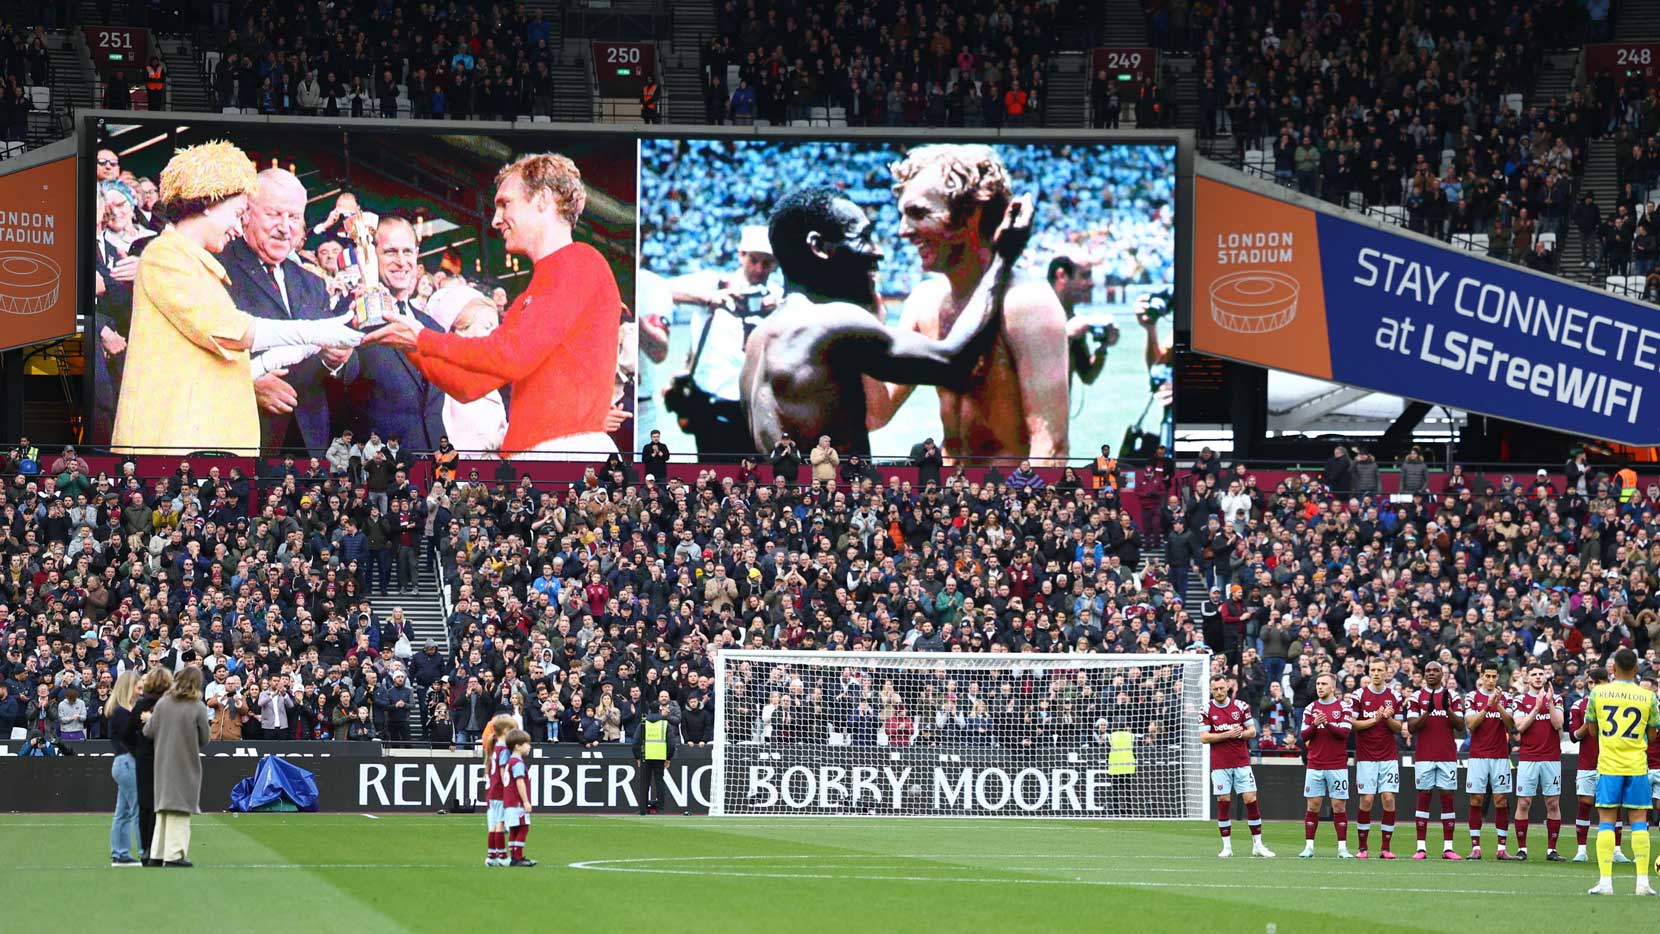 Tributes to Bobby Moore at London Stadium